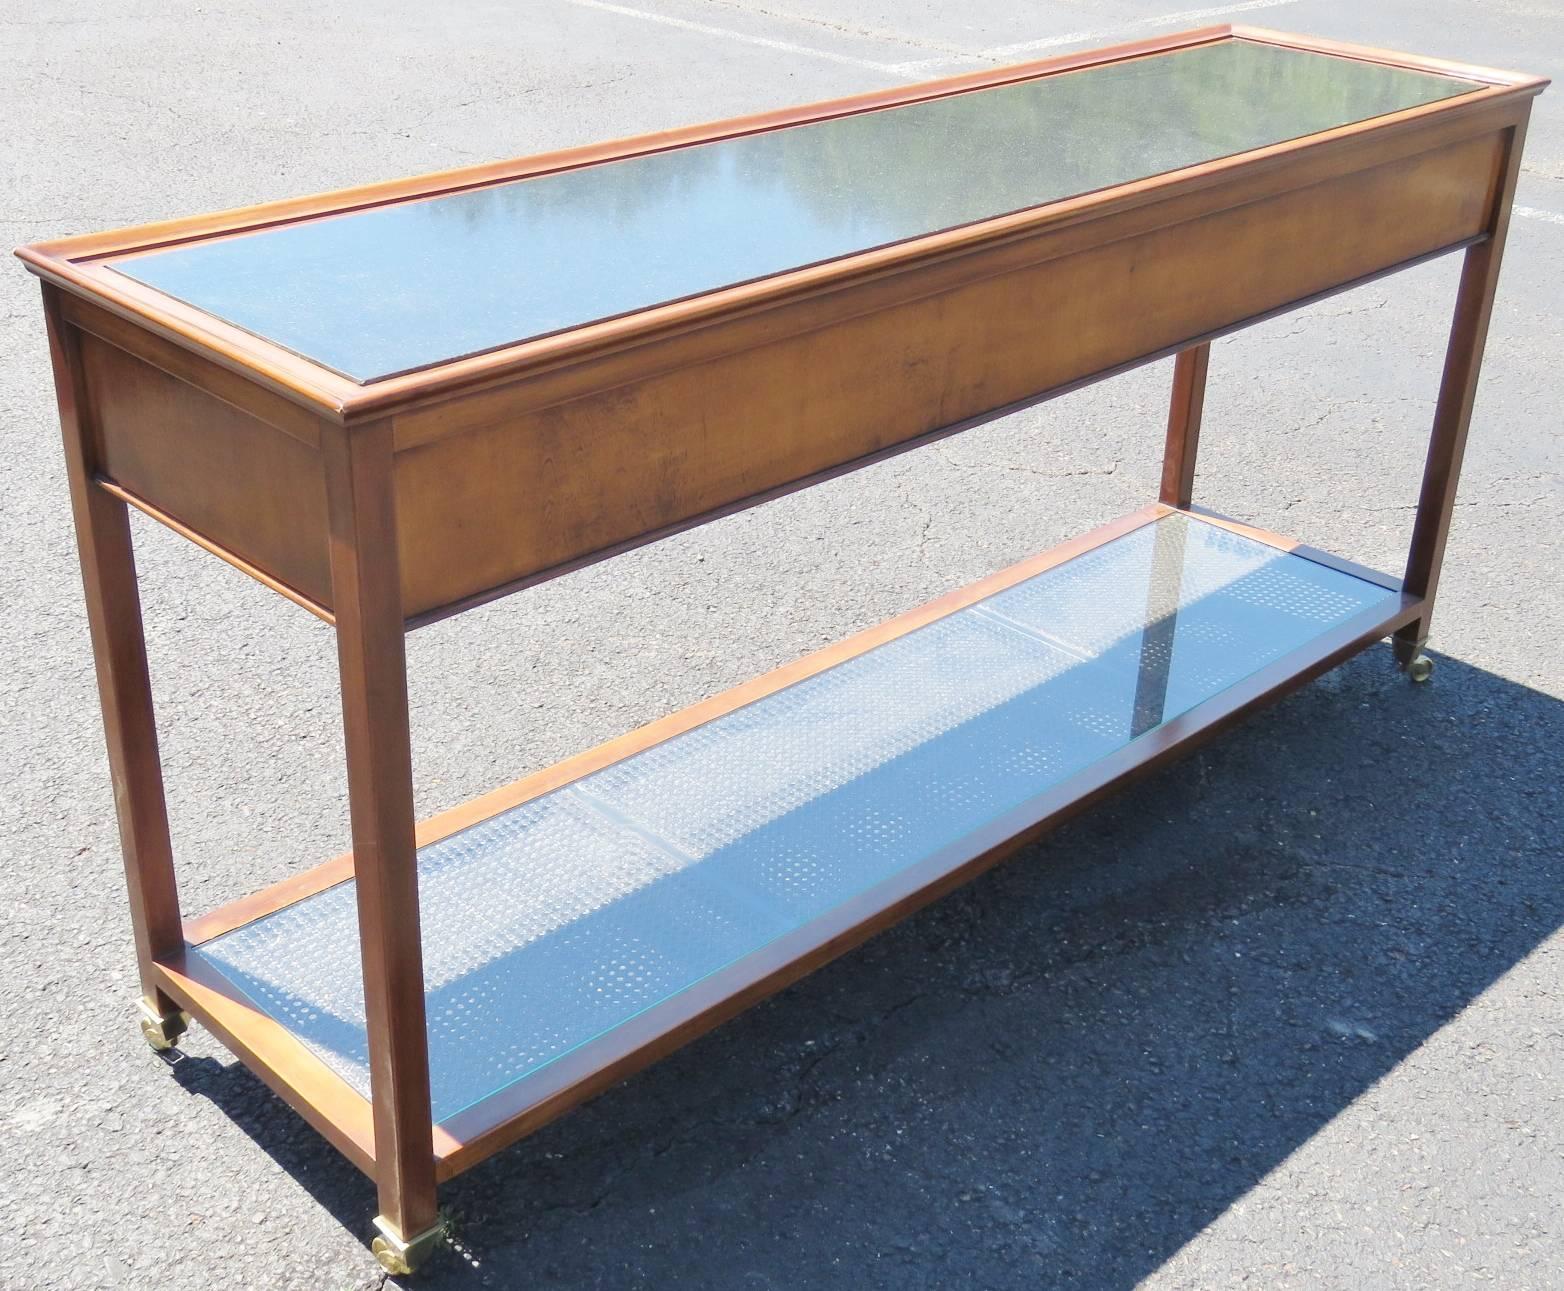 Marble top. Caned lower shelf with glass top.